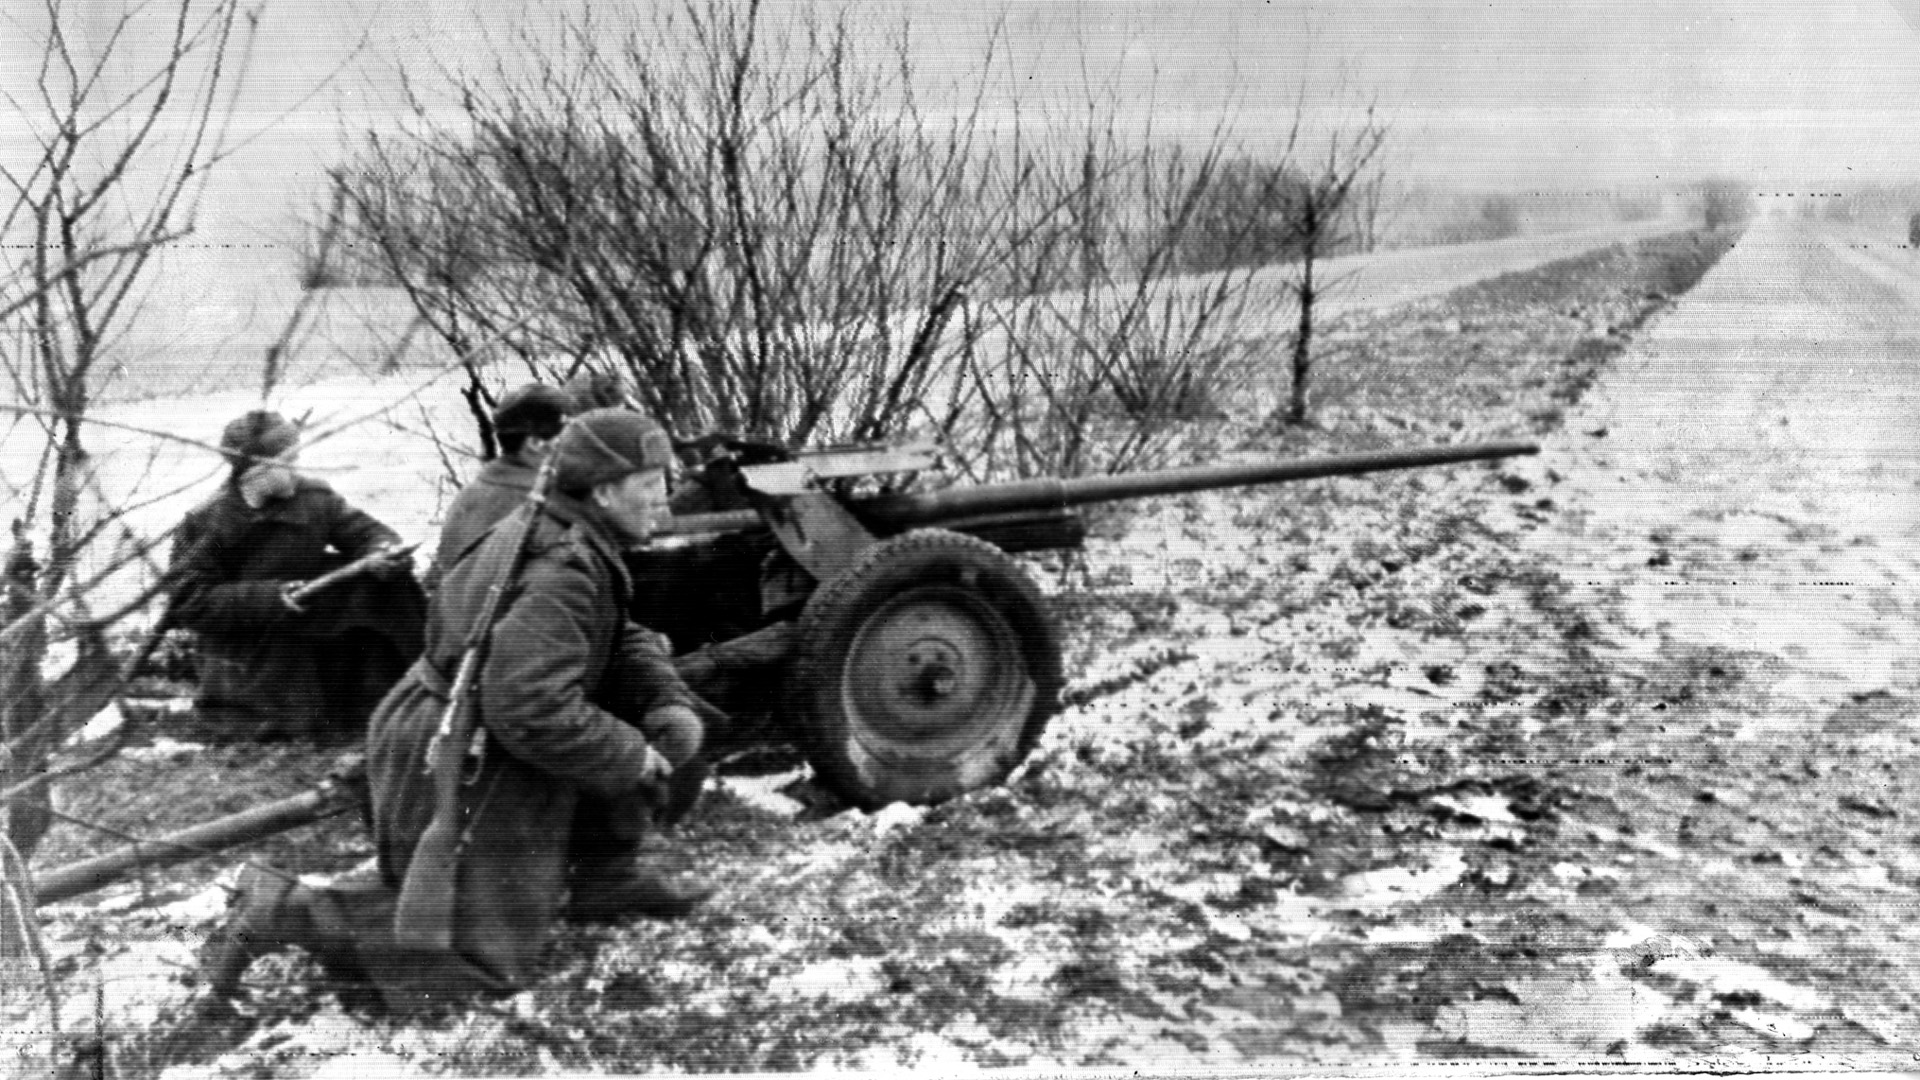 Advancing Soviet troops relied heavily on the light, quick-firing 45mm anti-tank gun to knock out German panzers and self-propelled artillery.